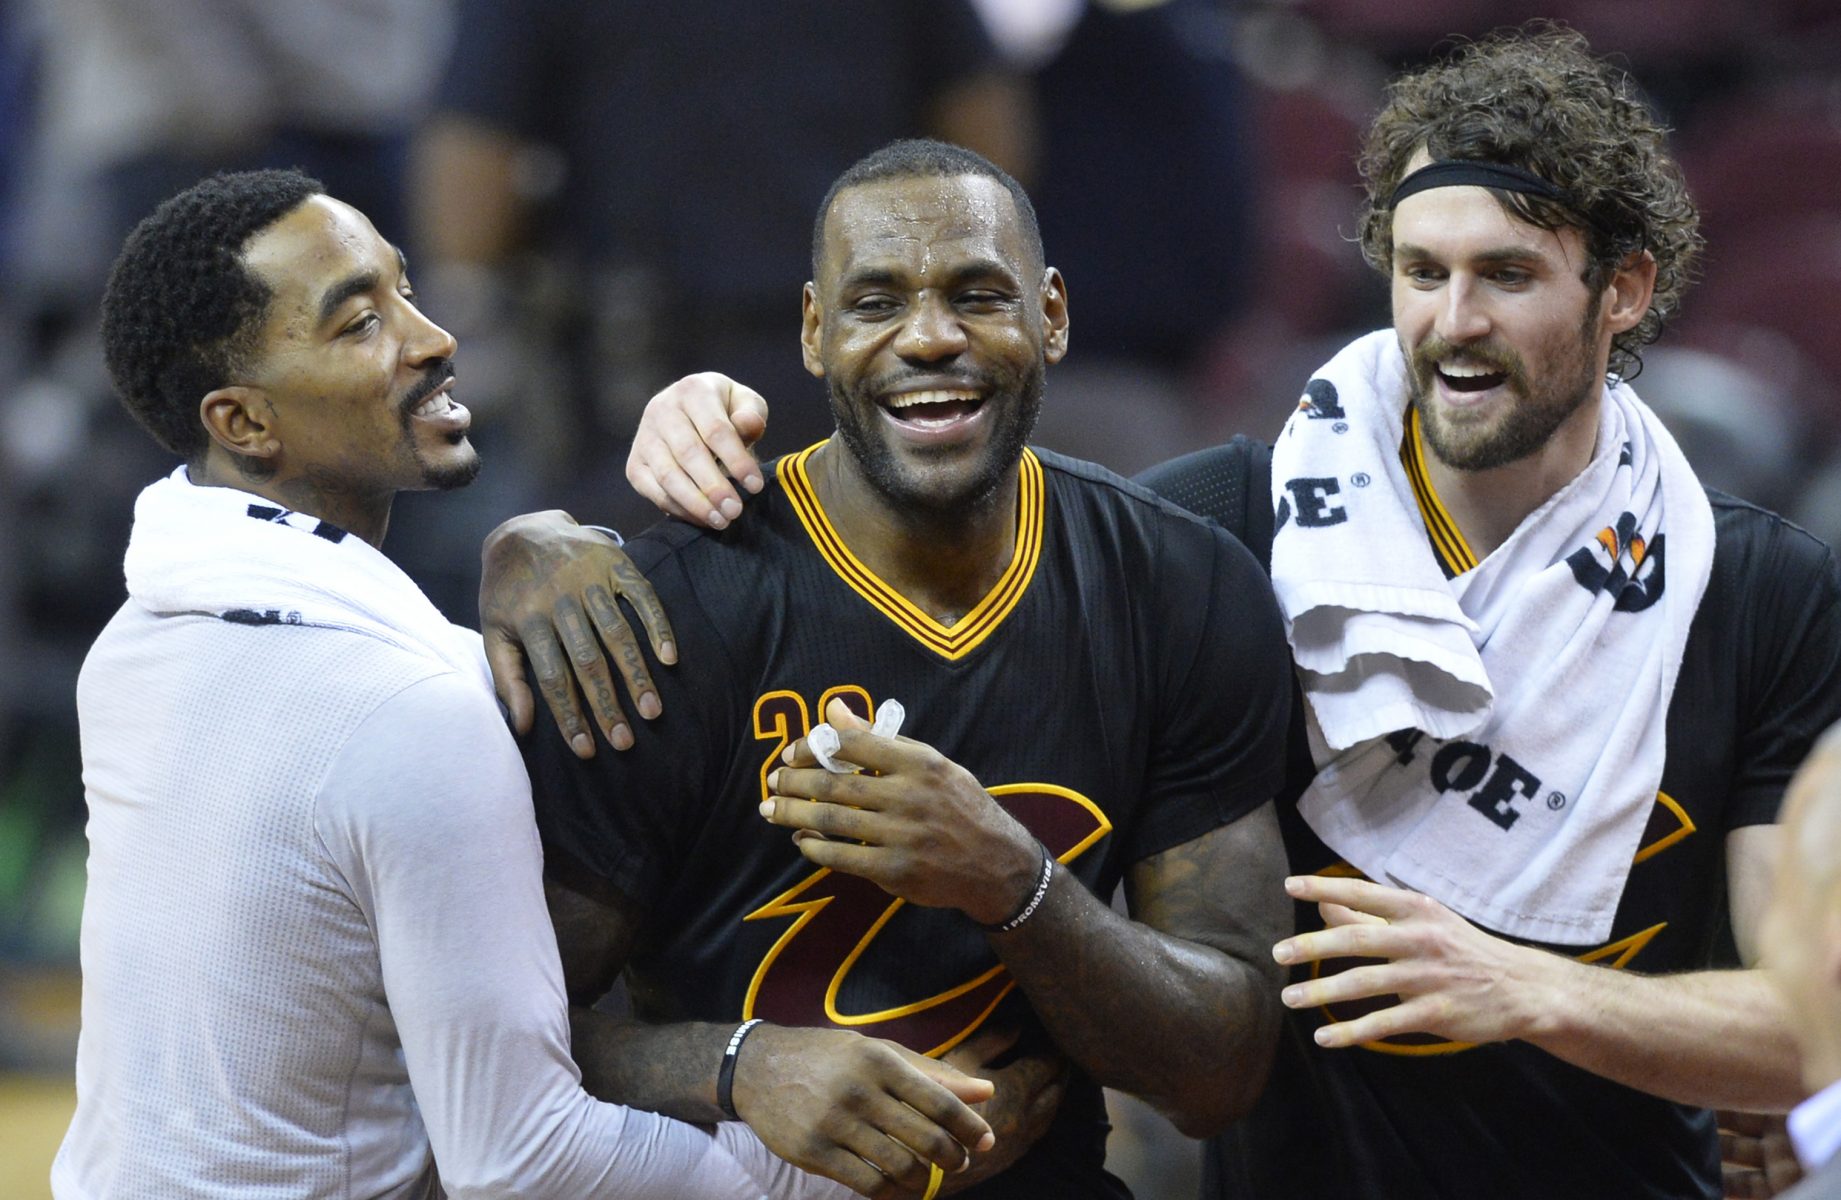 J.R. Smith, LeBron James, and Kevin Love